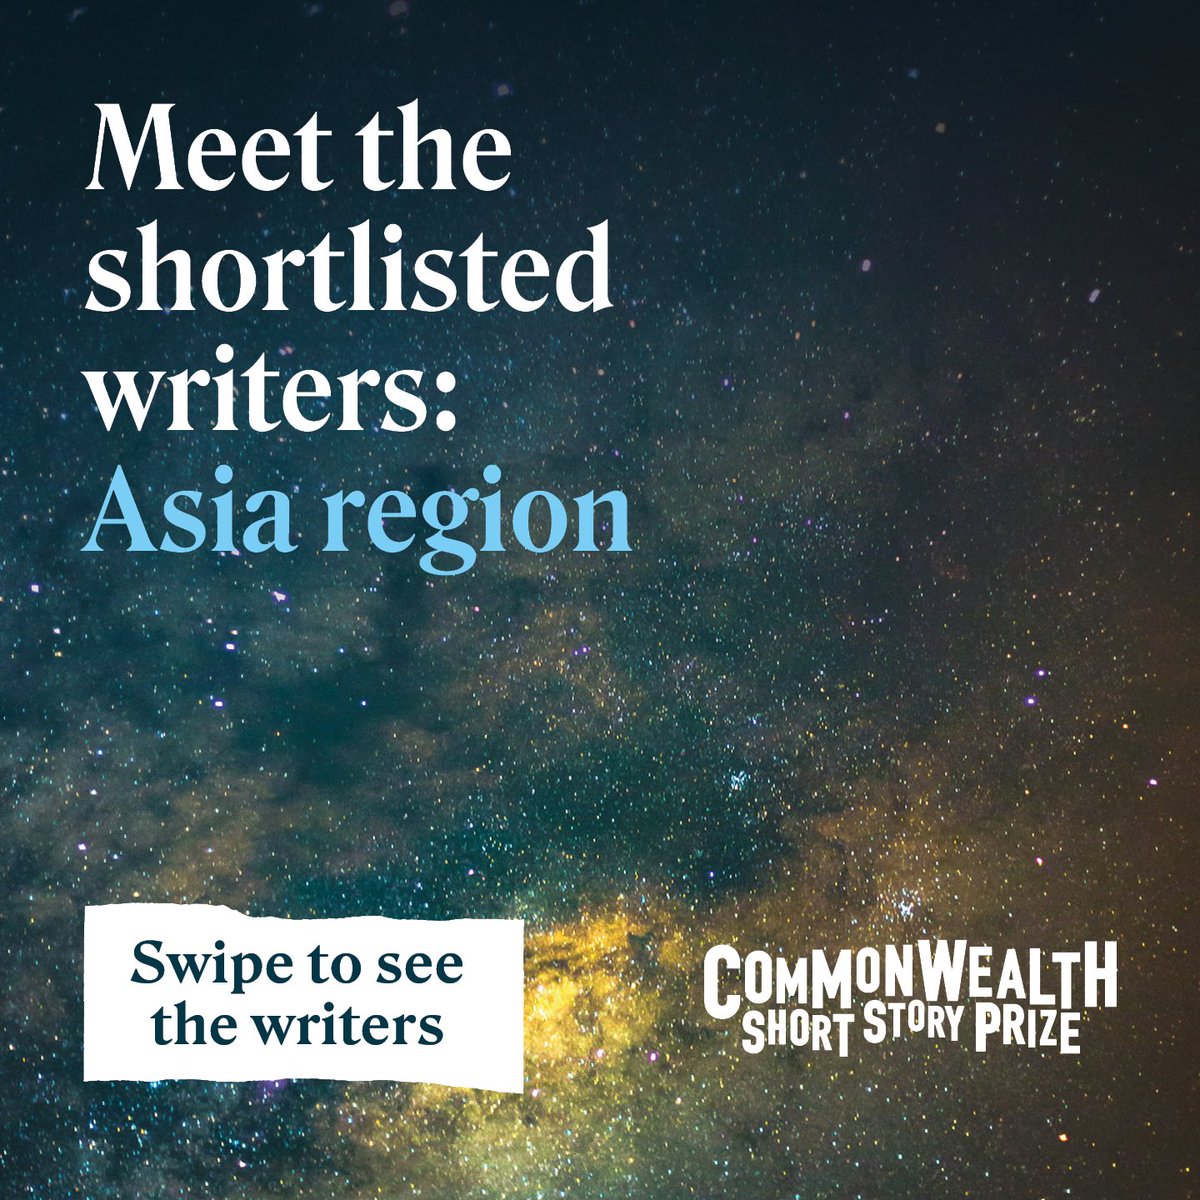 All four shortlisted writers for the #CWprize Asia region feature for the first time.

Read more 👇